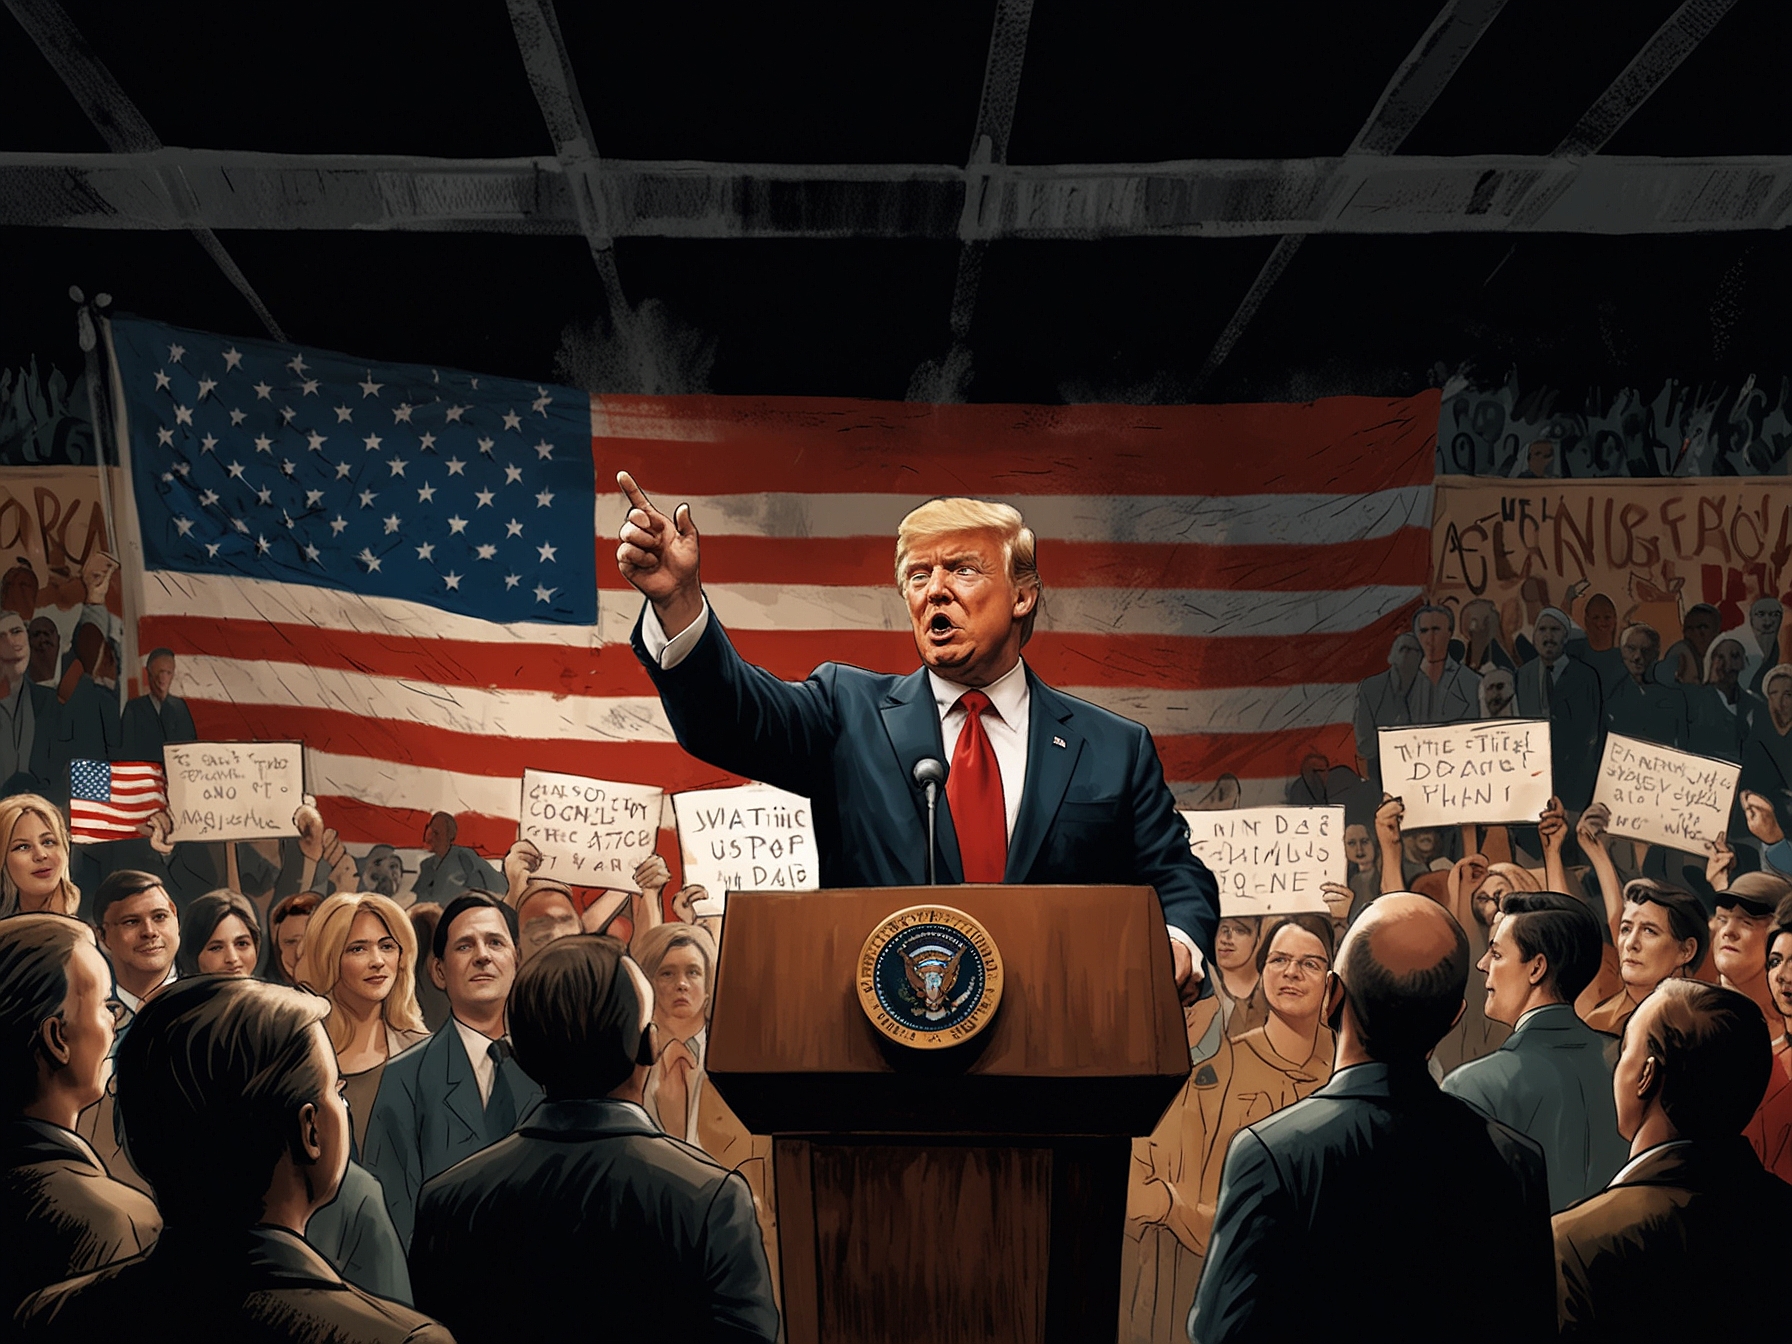 An illustration of former President Donald Trump addressing a rally, highlighting his support for deregulation, tax cuts, strict immigration policies, and skepticism towards climate change initiatives.